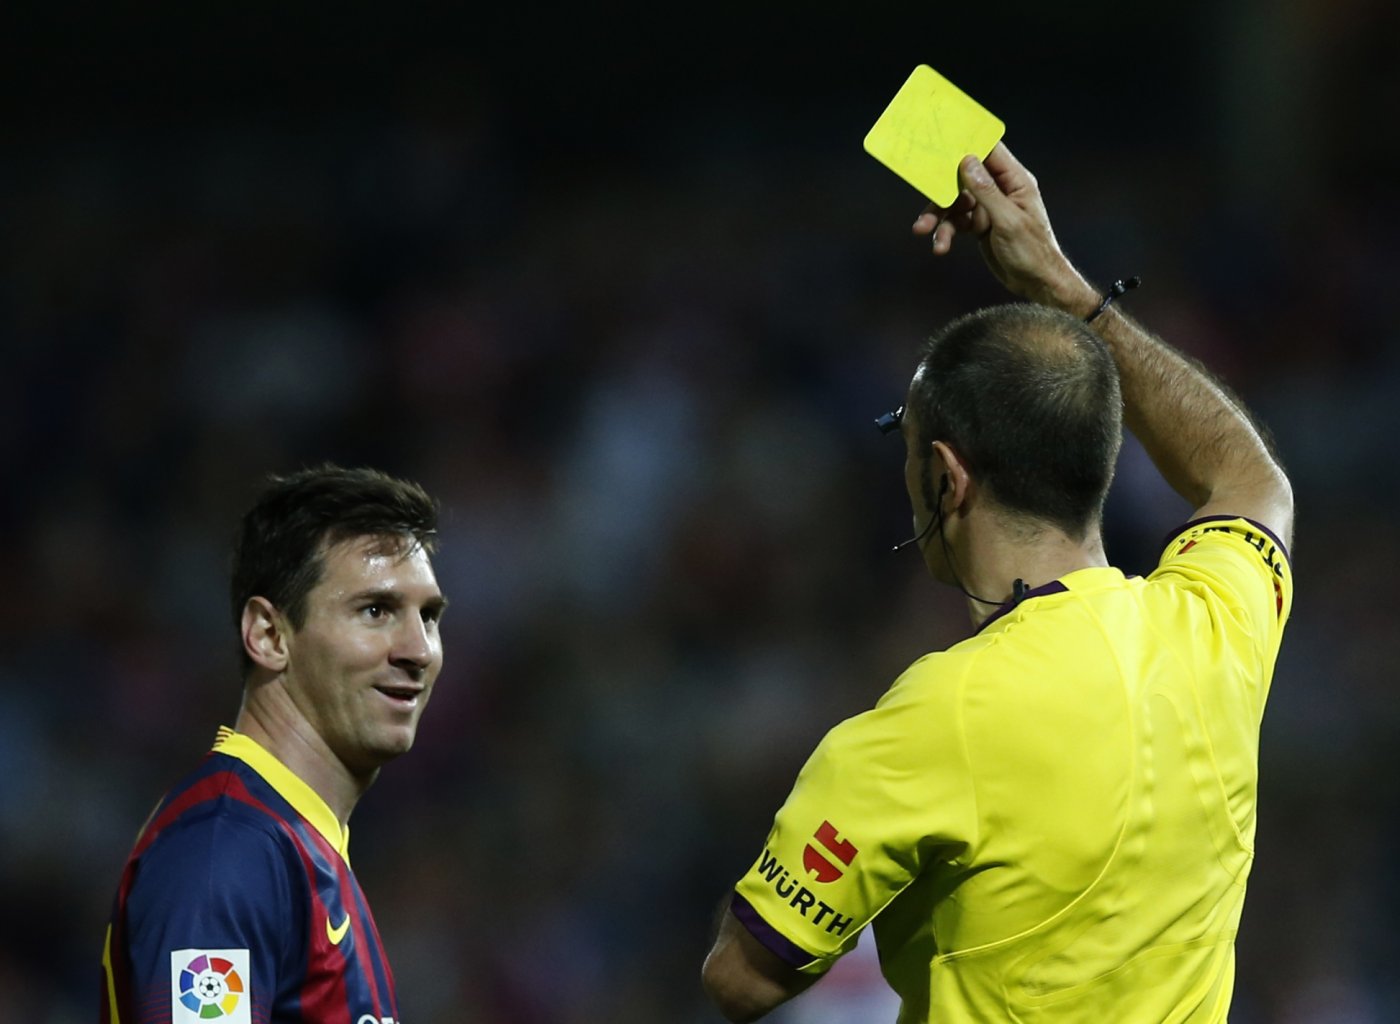 Messi being shown the yellow card and reacting with a smile